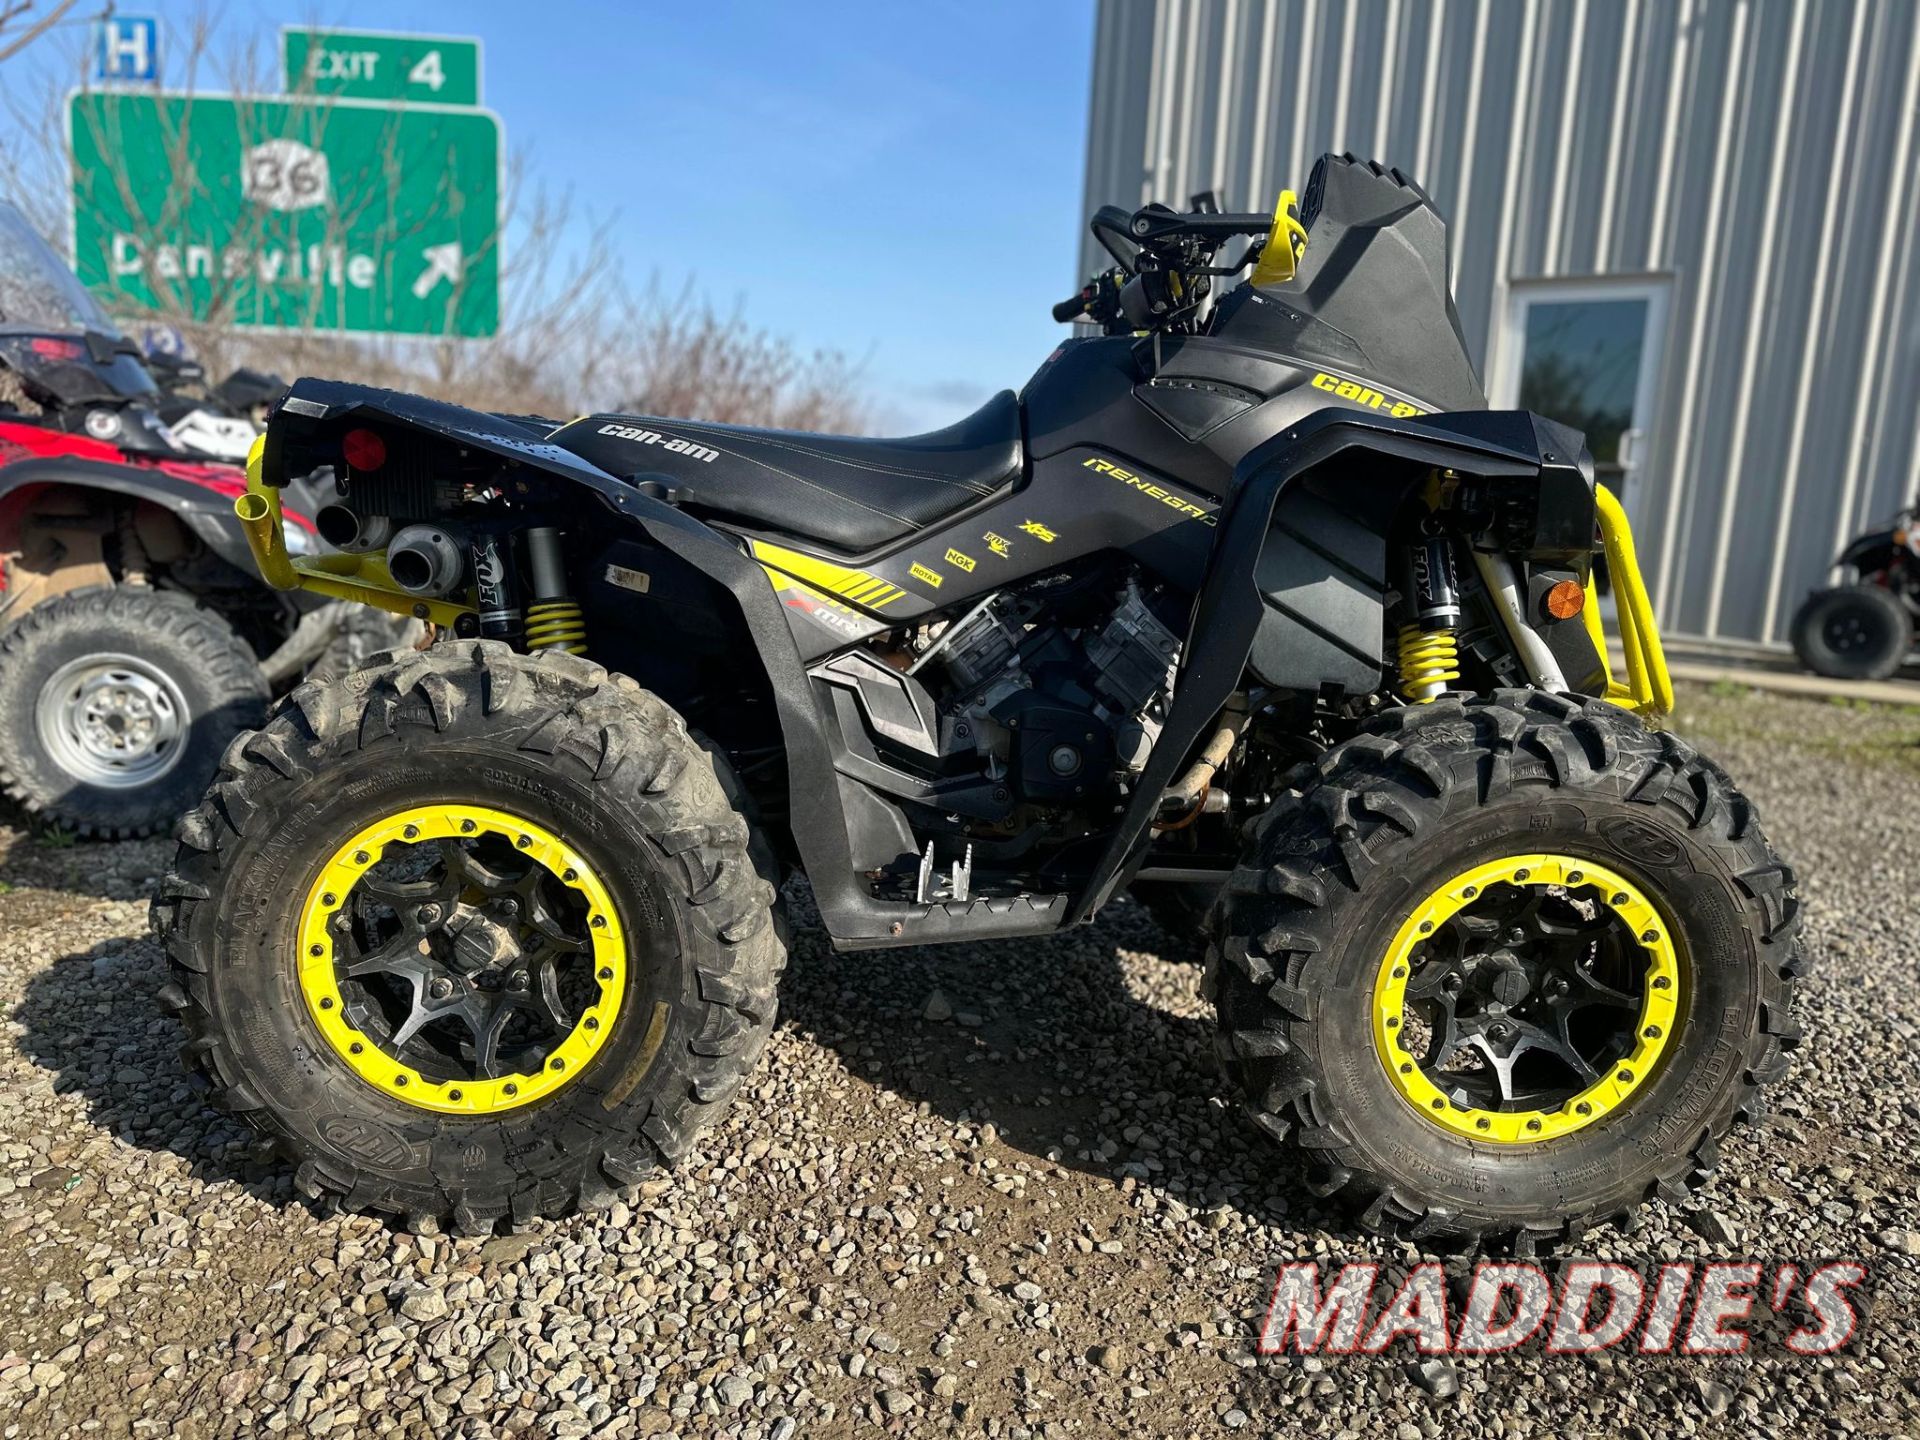 2018 Can-Am Renegade X MR 1000R in Dansville, New York - Photo 7